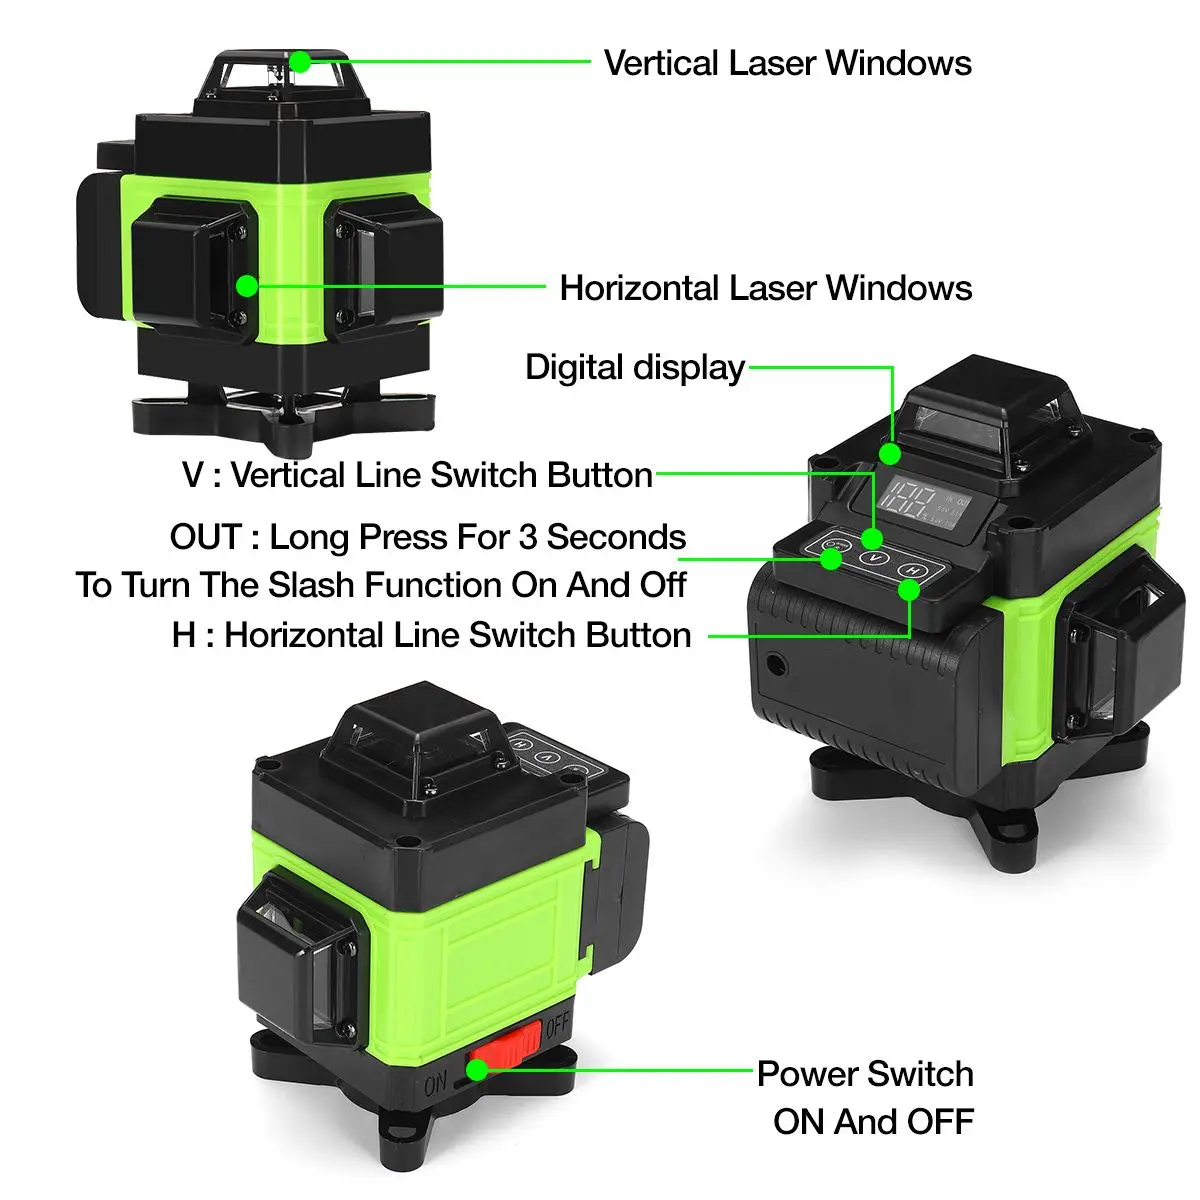 16 12 Lines Laser levels 4D/3D Green Light Horizontal&Vertical Cross 360  Auto Self Leveling Laser Levels With Tripod&Remoter&LCD|Laser Levels| -  AliExpress